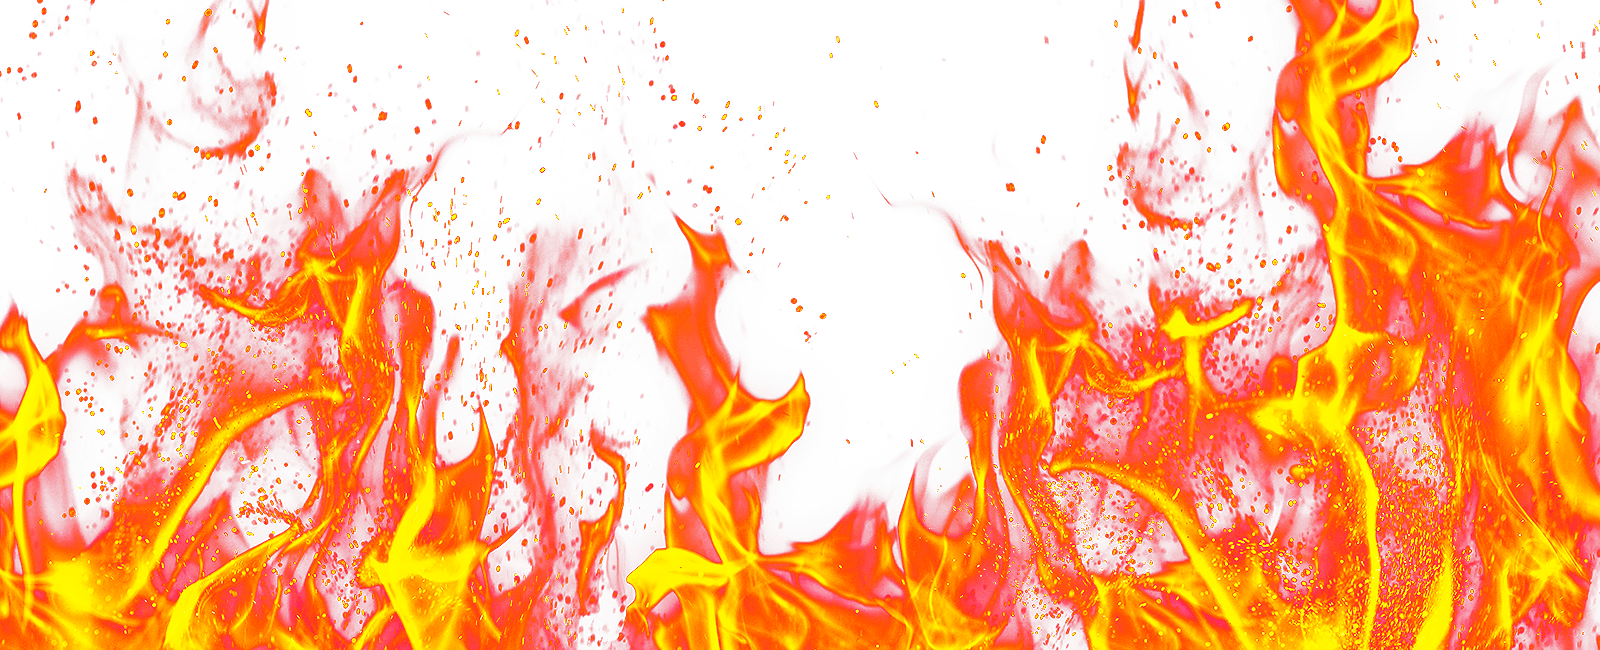 Fire Png Image - Fire, Transparent background PNG HD thumbnail